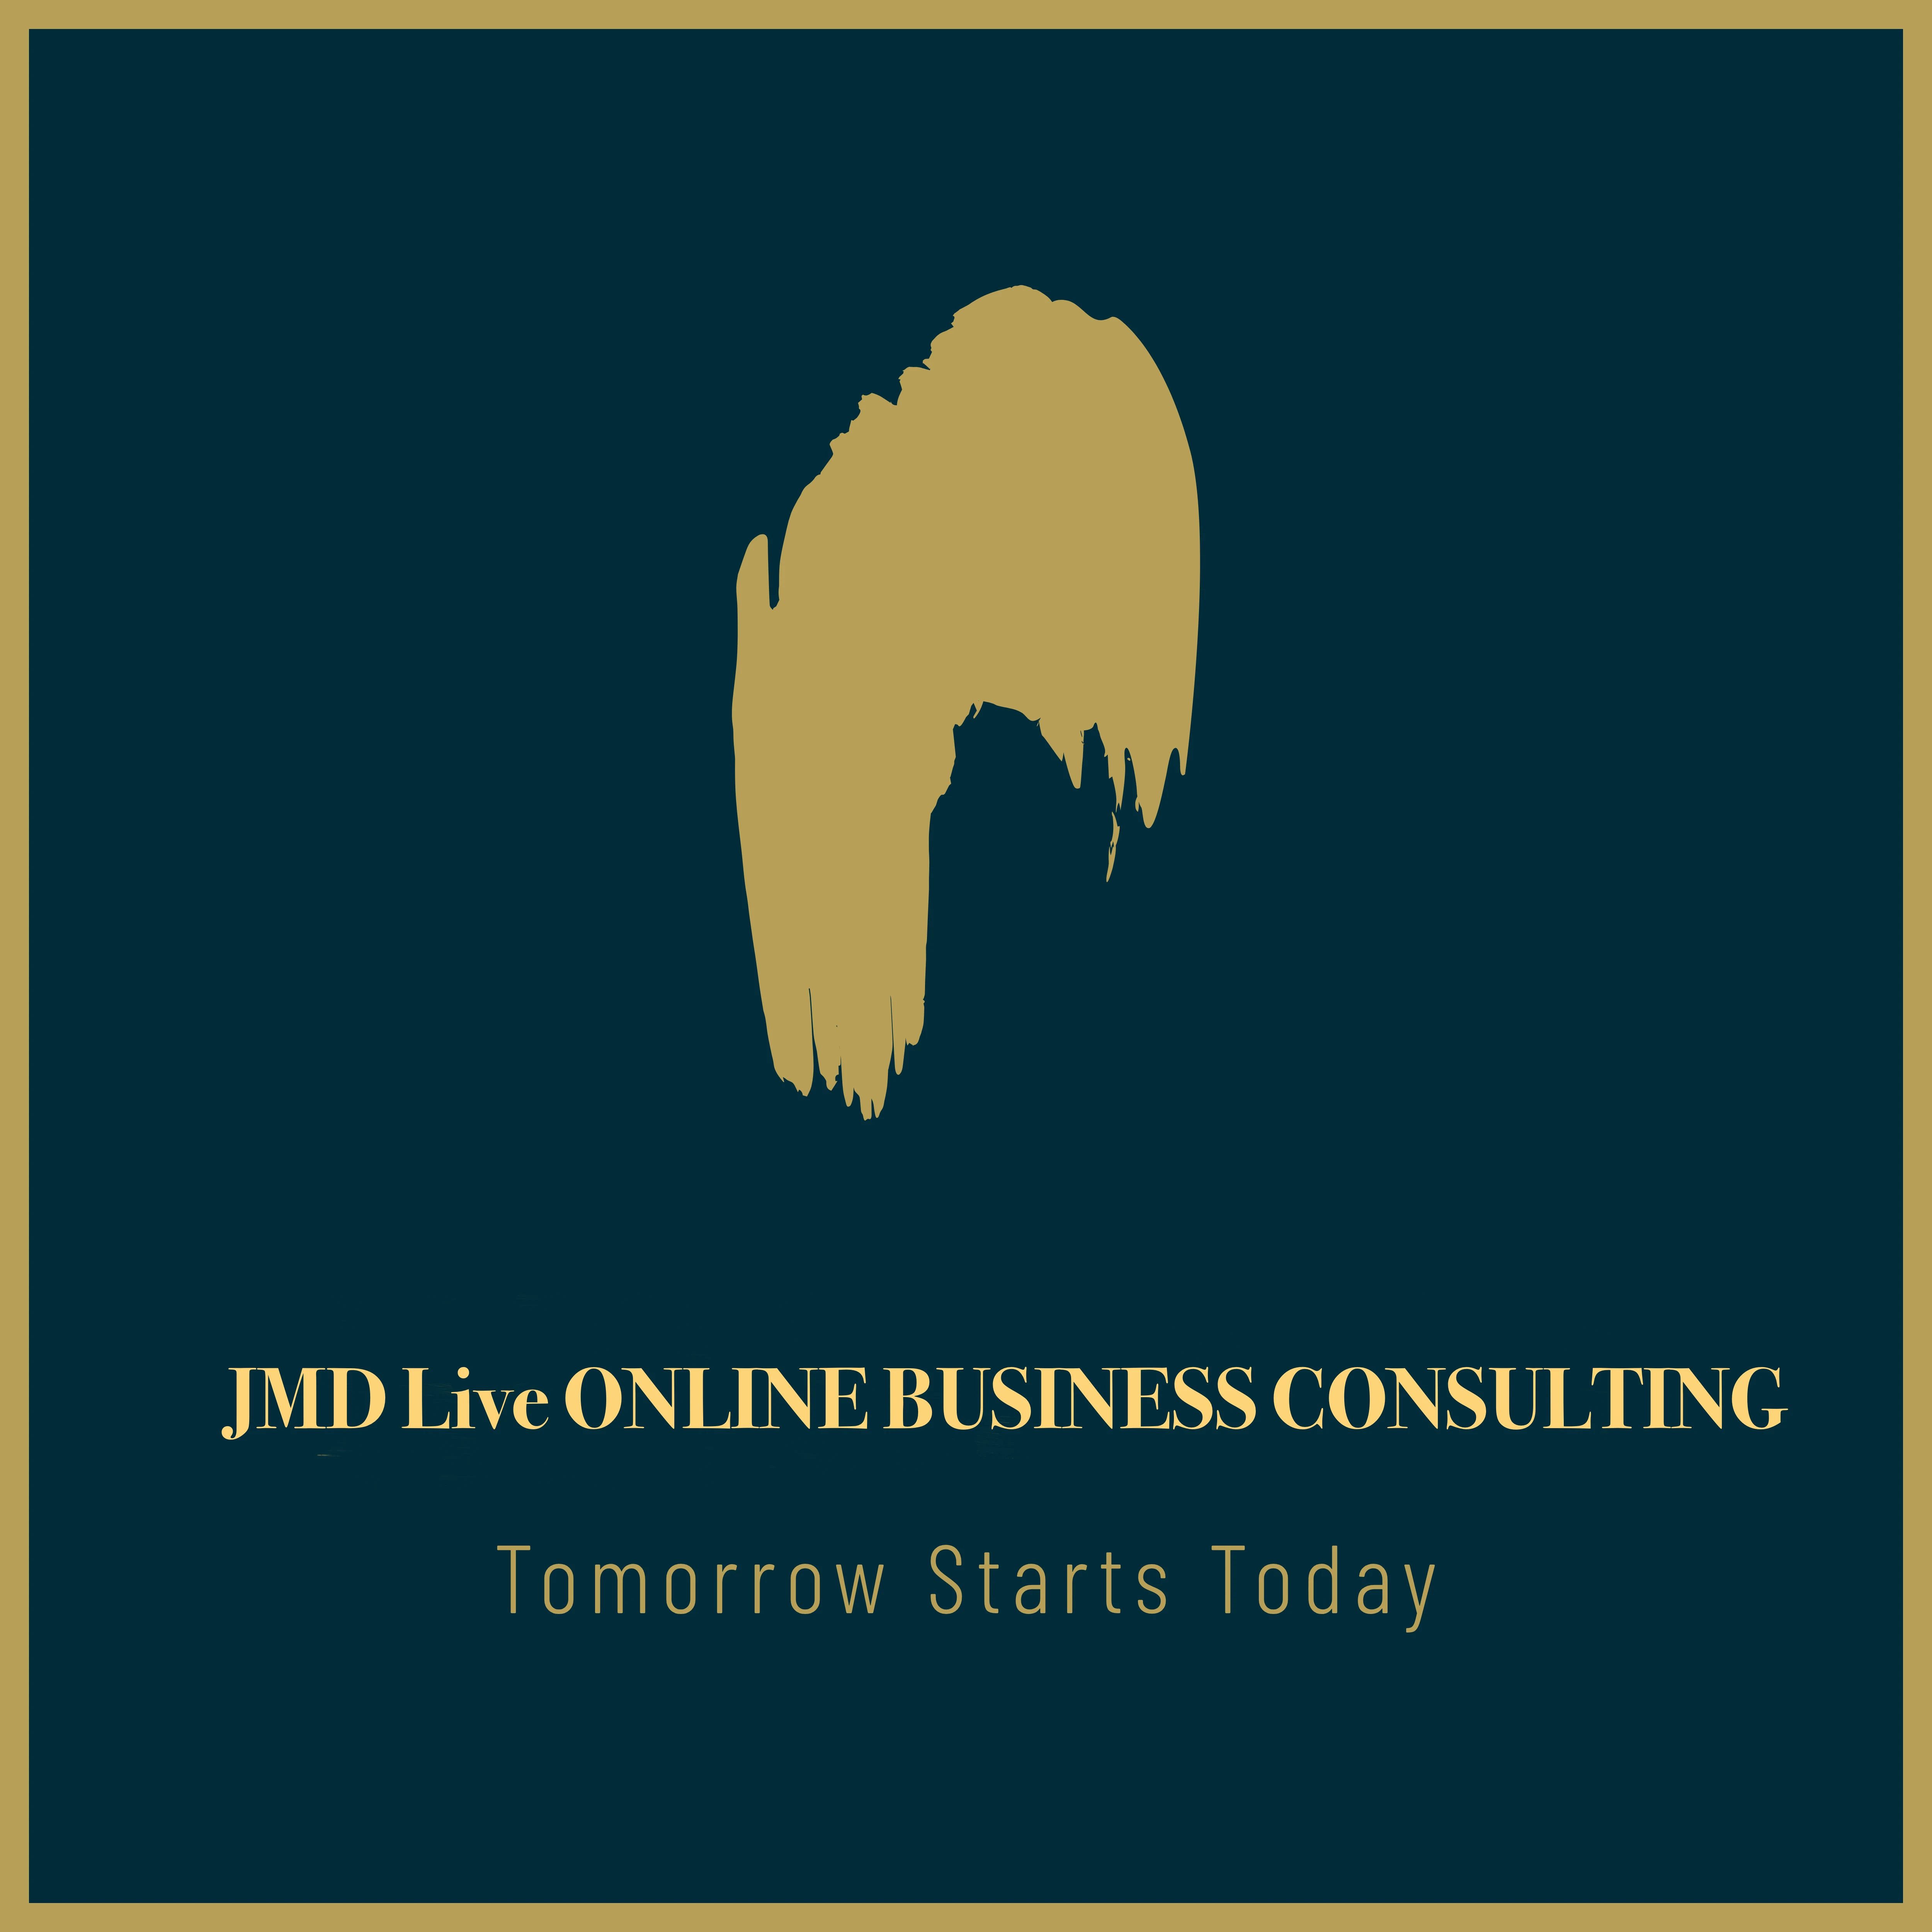 About JMD Live ONLINE BUSINESS CONSULTING